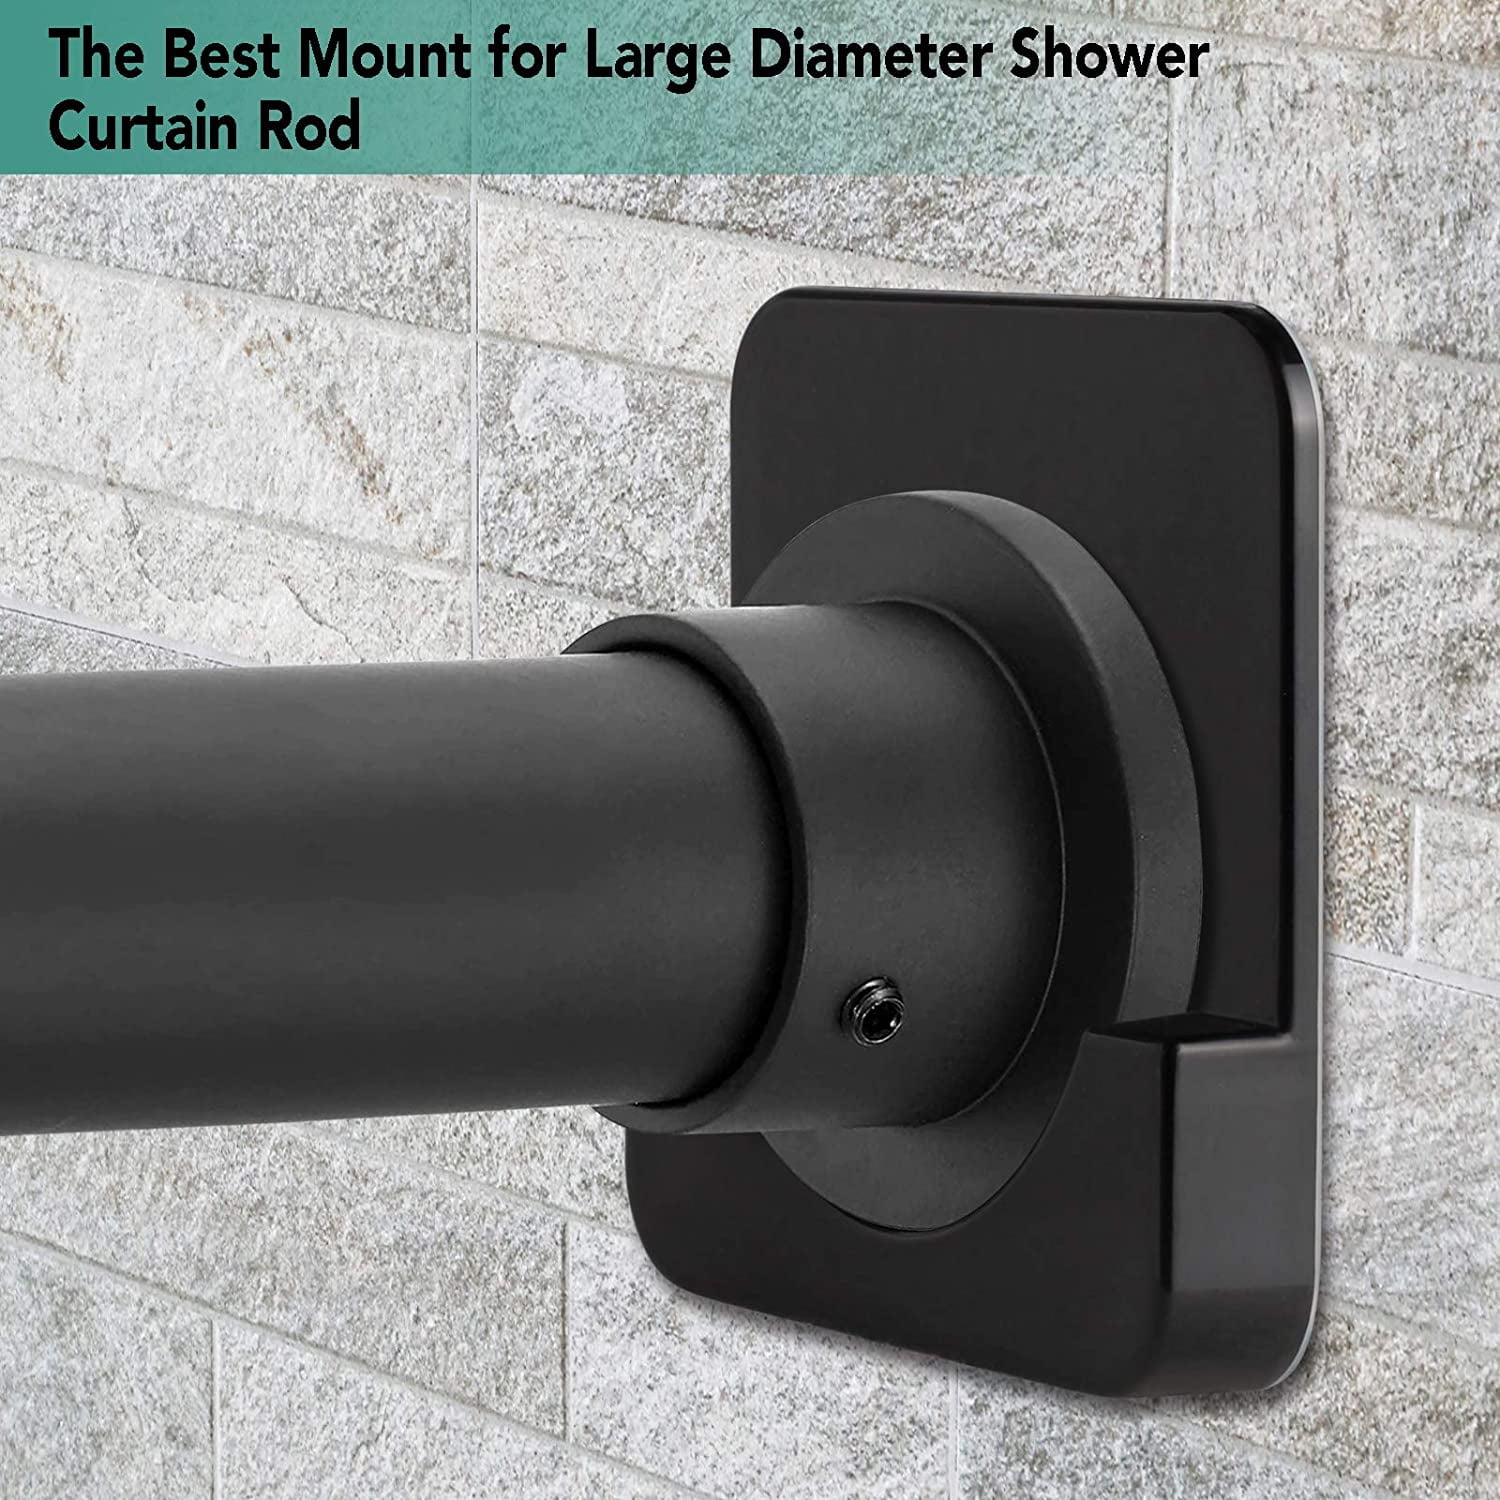 Adhesive Shower Curtain Rod Tension Holder Shower Rod Mount Retainer ...